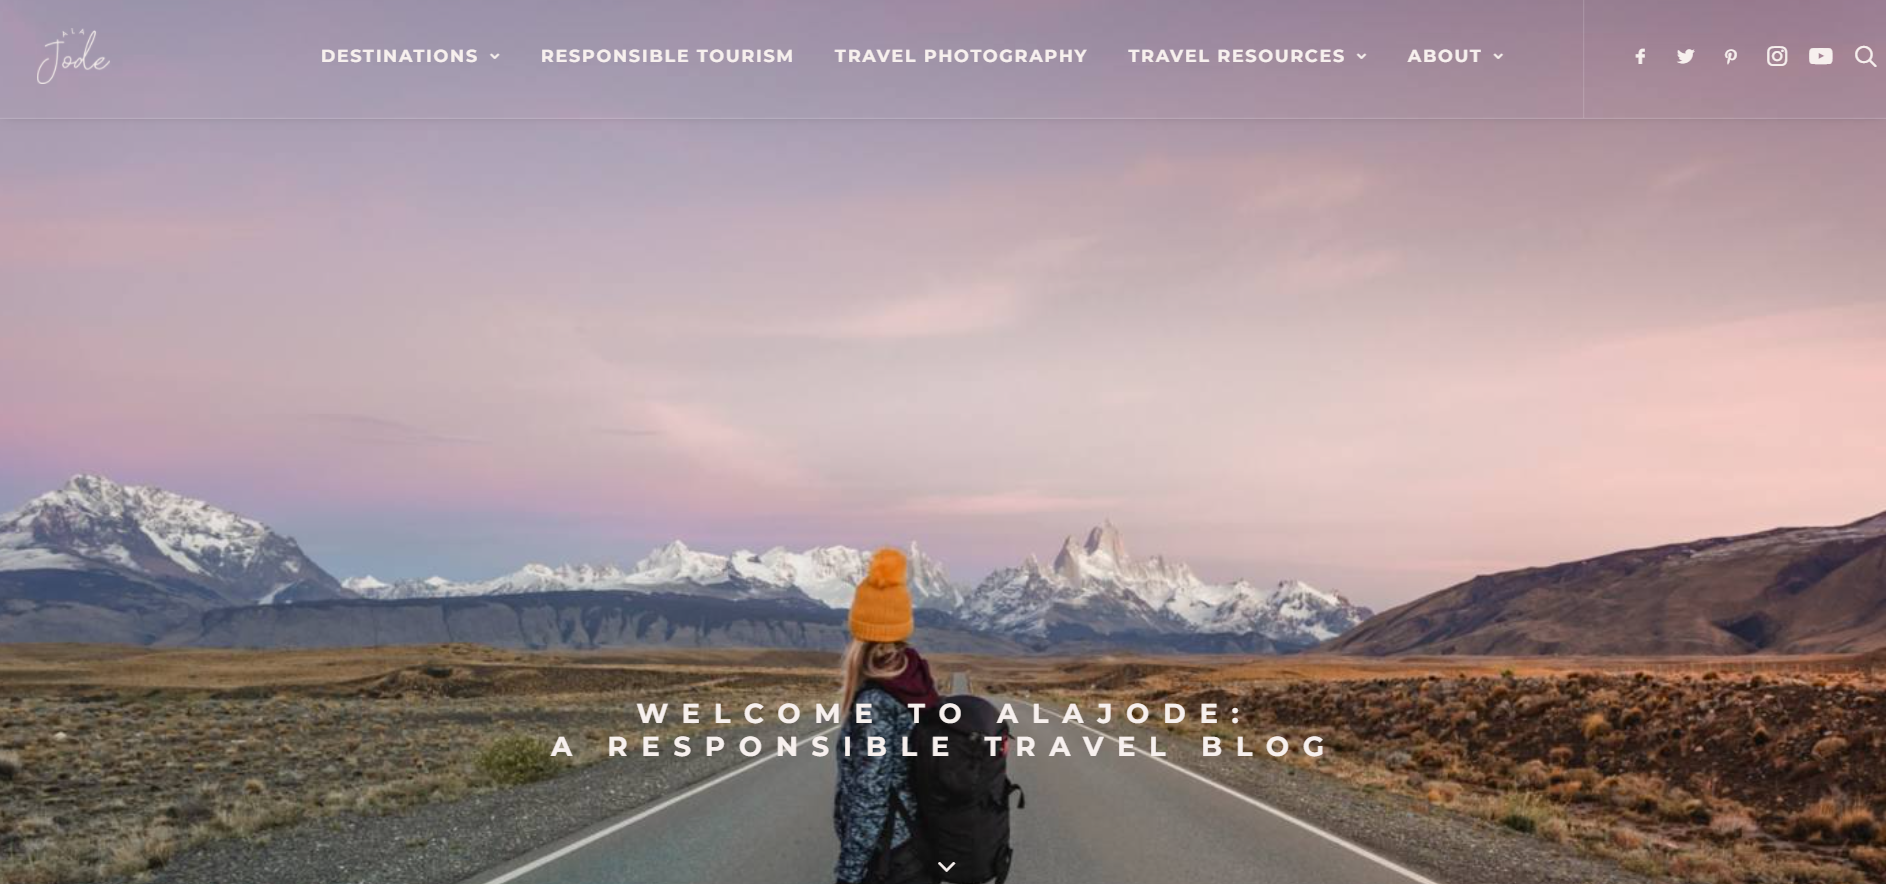 A screenshot of the Alajode travel blog homepage featuring a girl with a backpack standing on the road against a backdrop of mountains.
